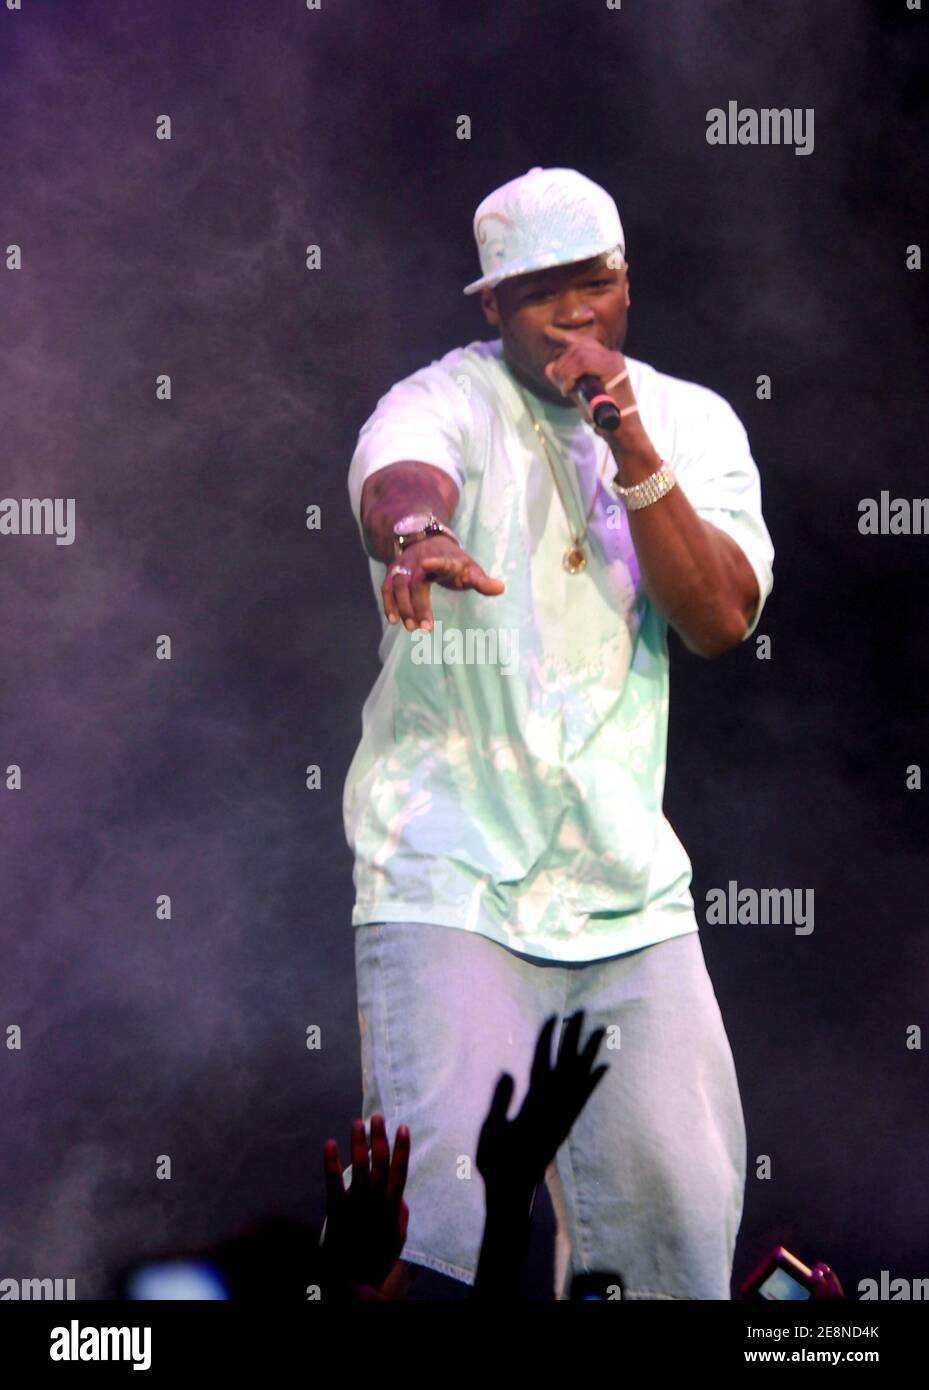 Rapper 50 Cent performs as part of the Screamfest 2007 tour stop at Madison Square Garden in New York City, NY, USA on August 22, 2007. Photo by Donna Ward/ABACAPRESS.COM Stock Photo